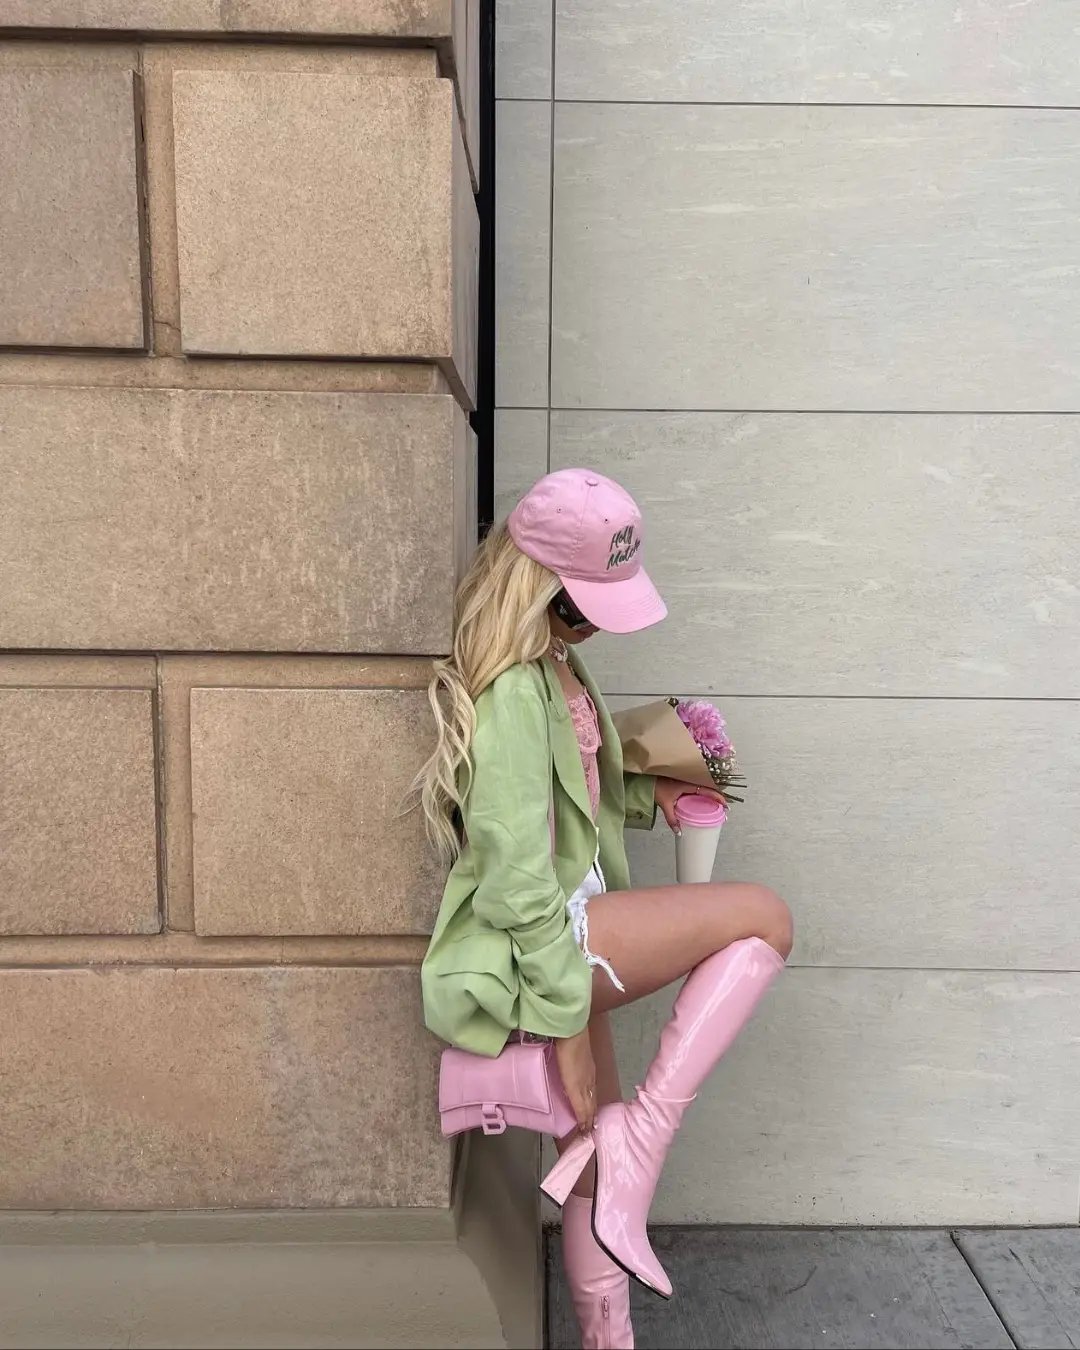  A woman wearing a green jacket and pink pants is sitting on a ledge.